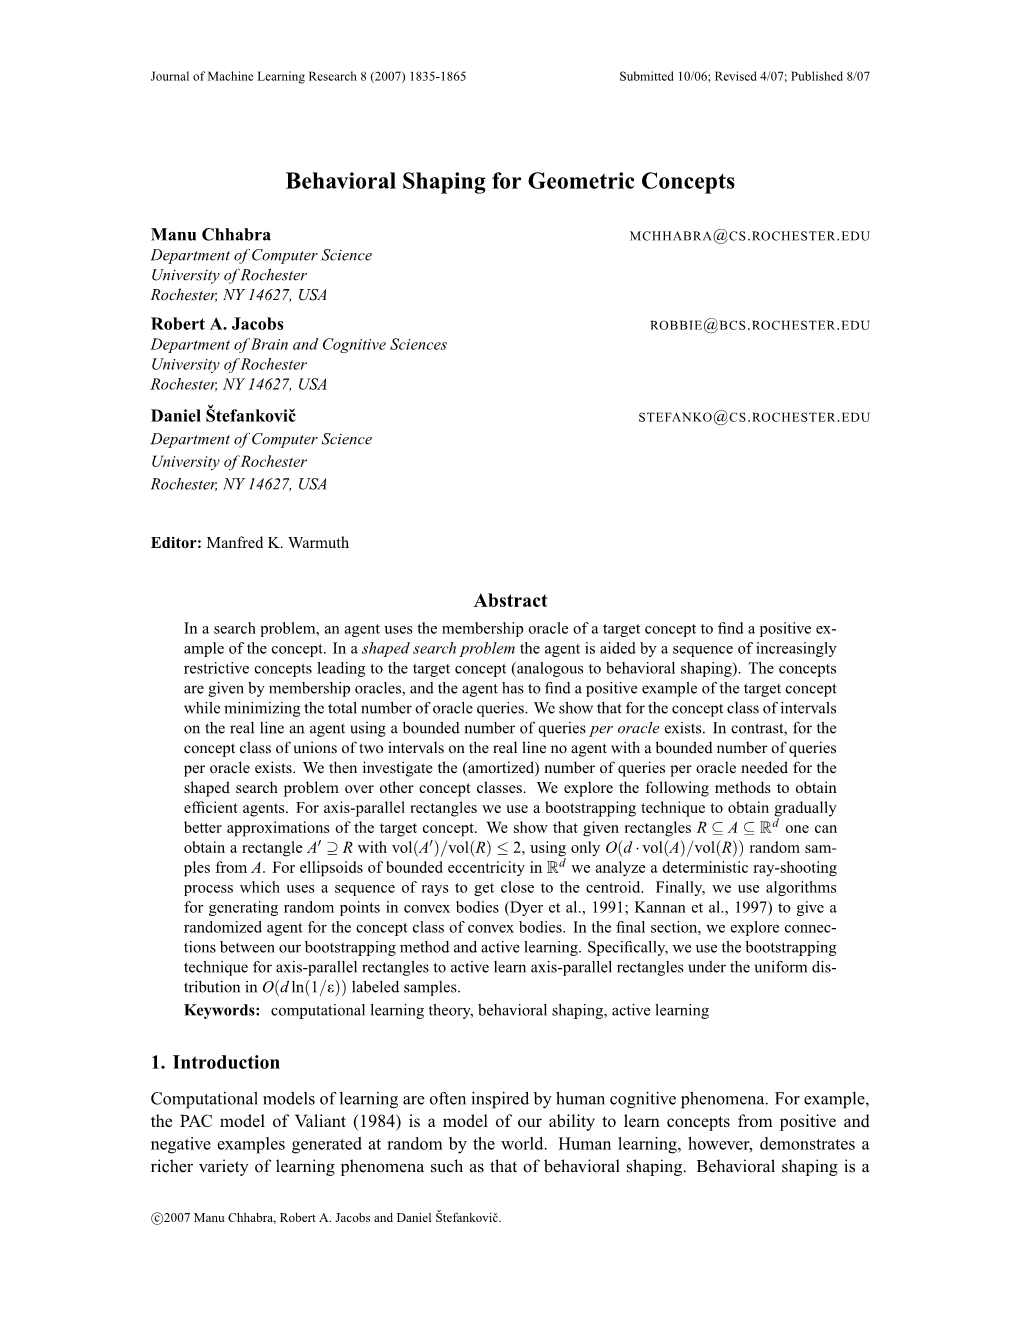 Behavioral Shaping for Geometric Concepts